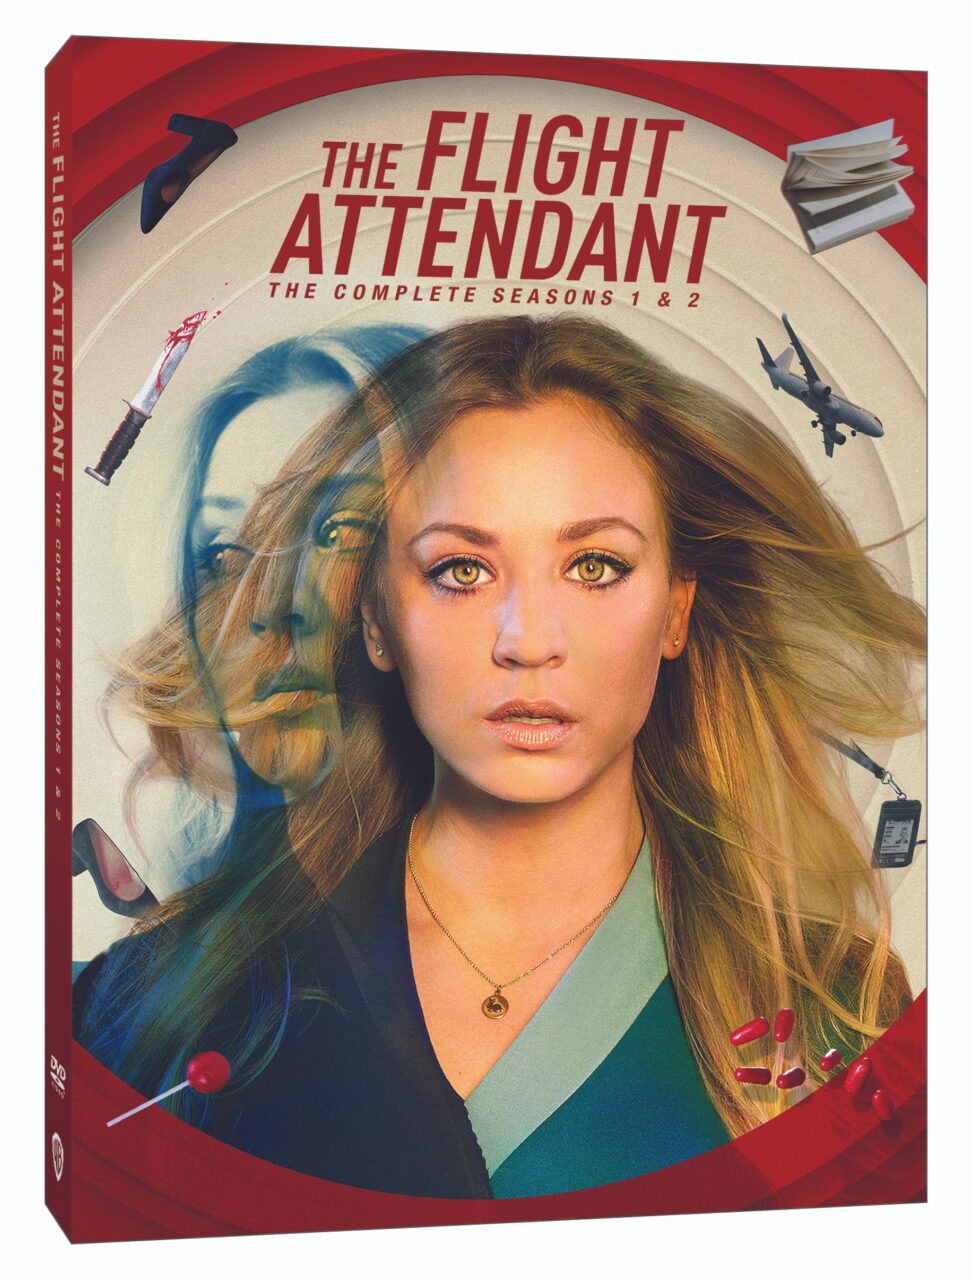 The Flight Attendant The Complete Seasons 1 & 2 DVD cover (Warner Bros. Home Entertainment)